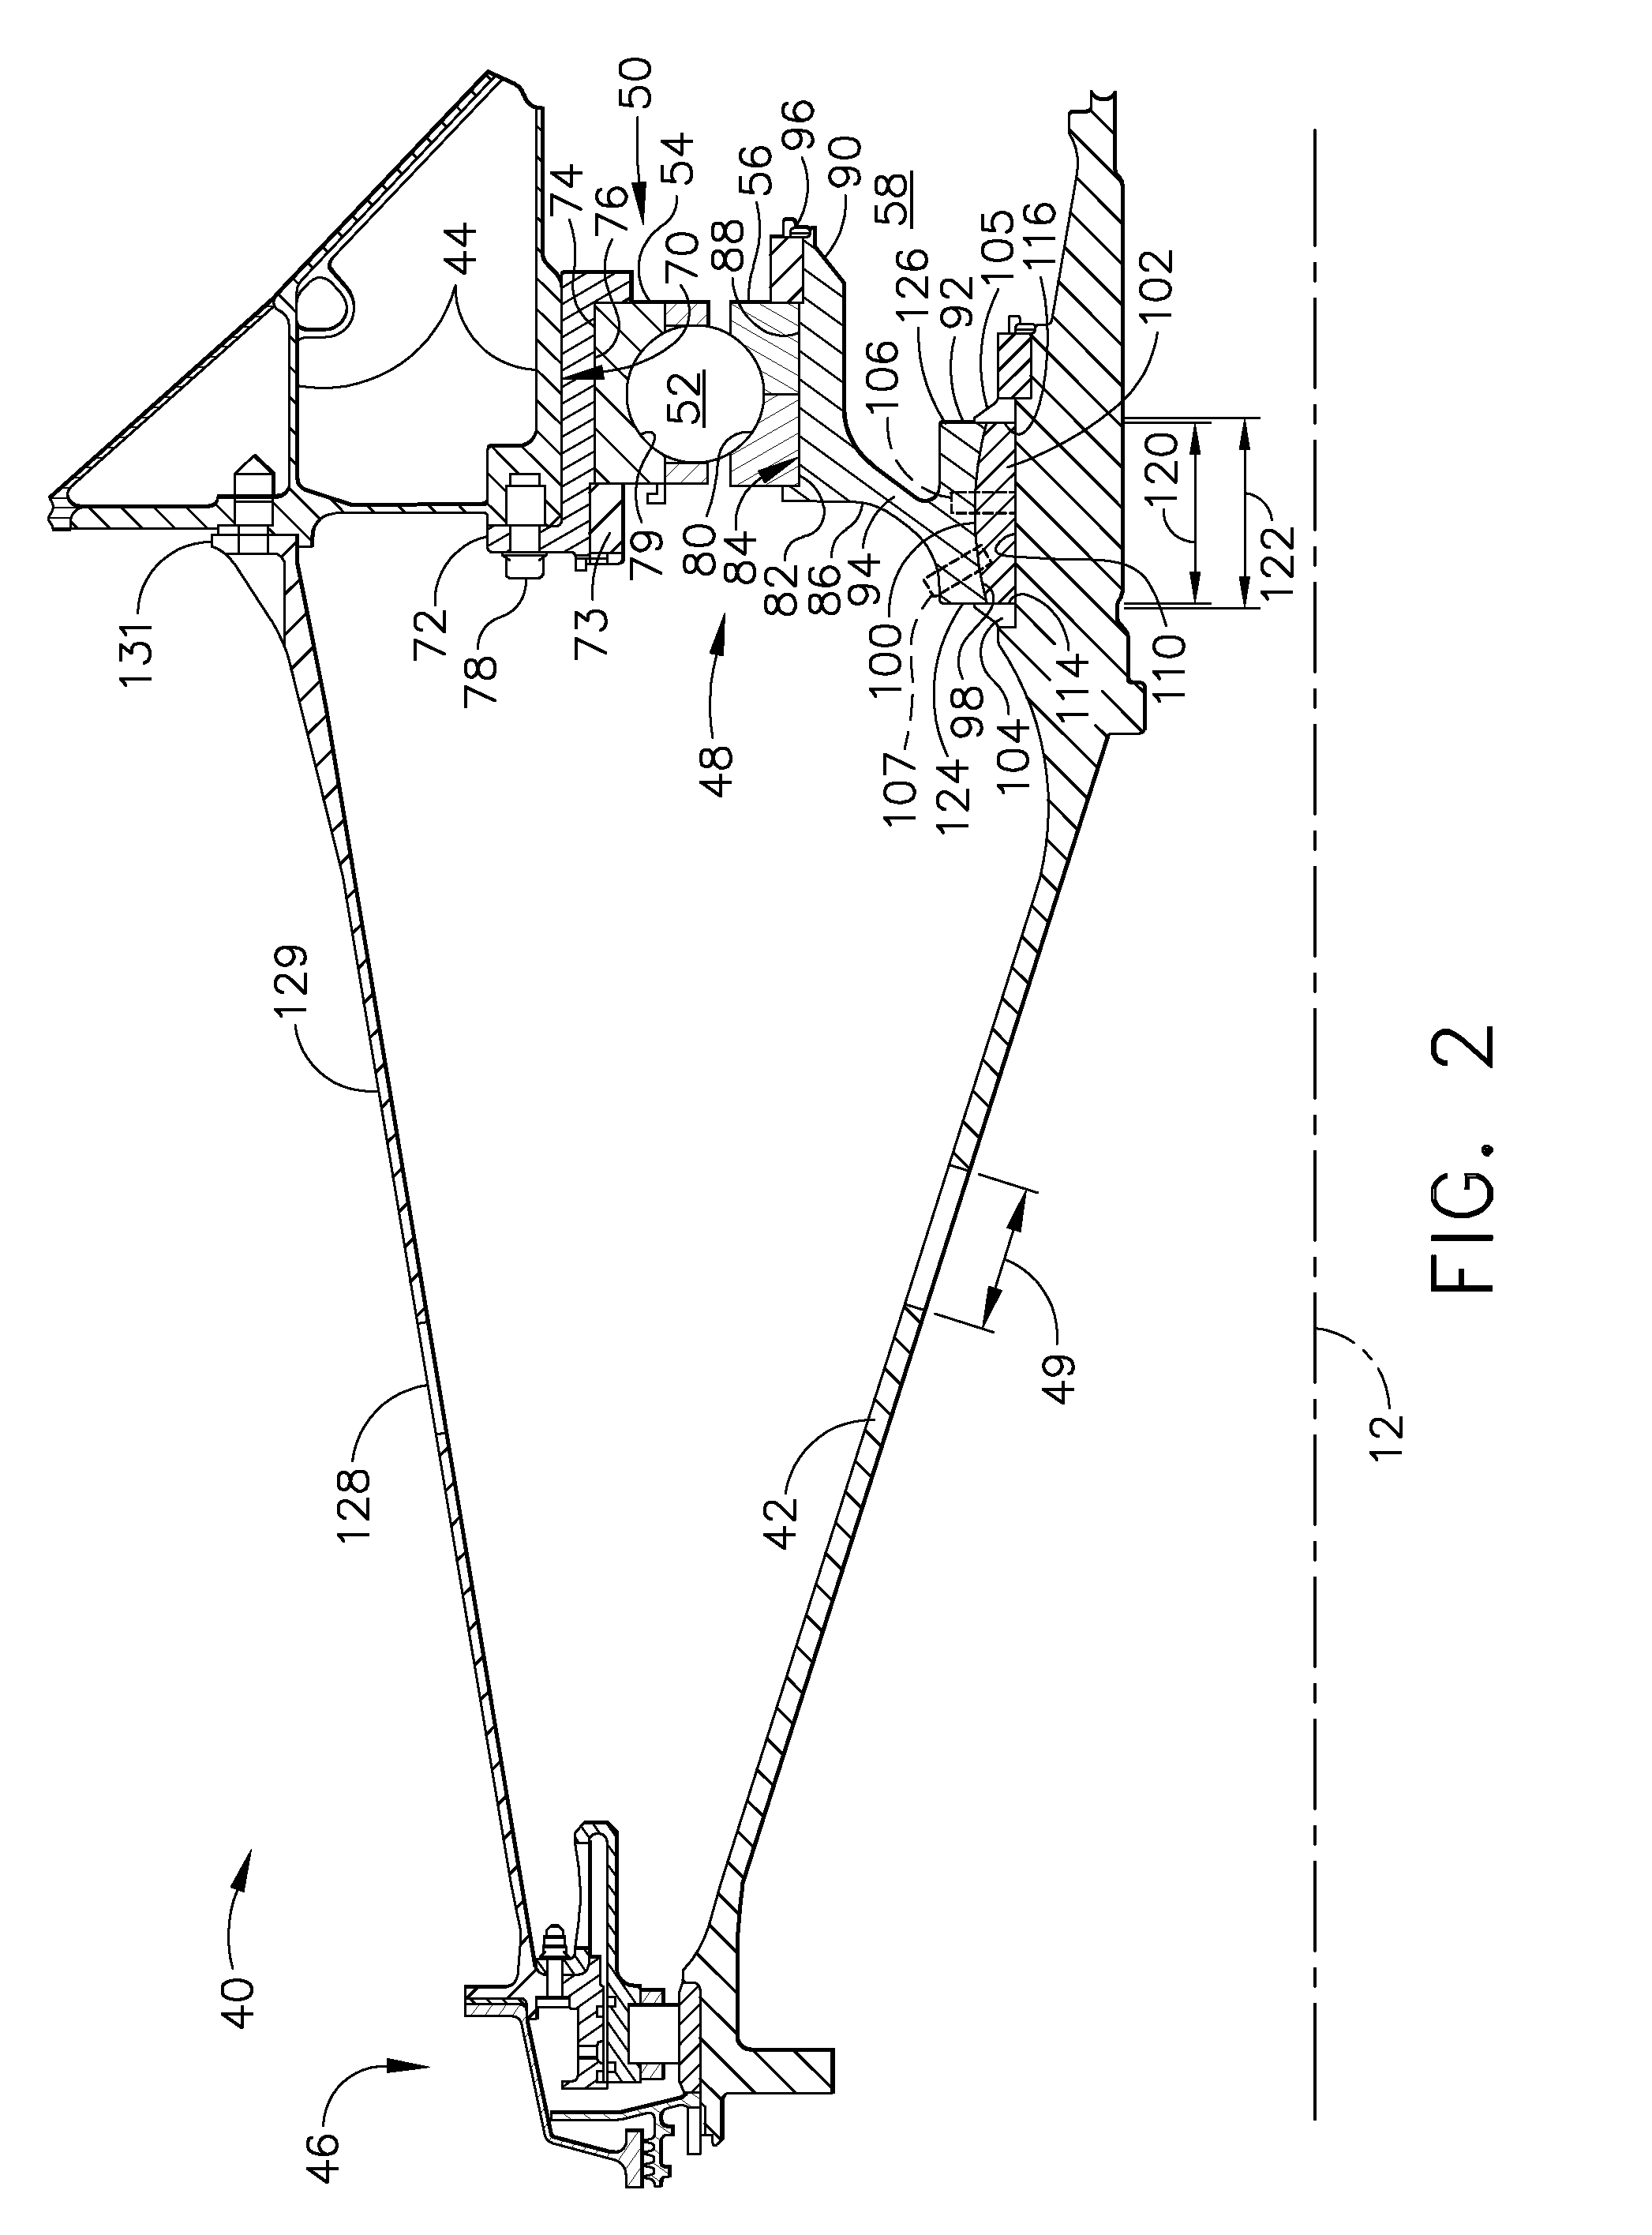 Method and apparatus for supporting rotor assemblies during unbalances